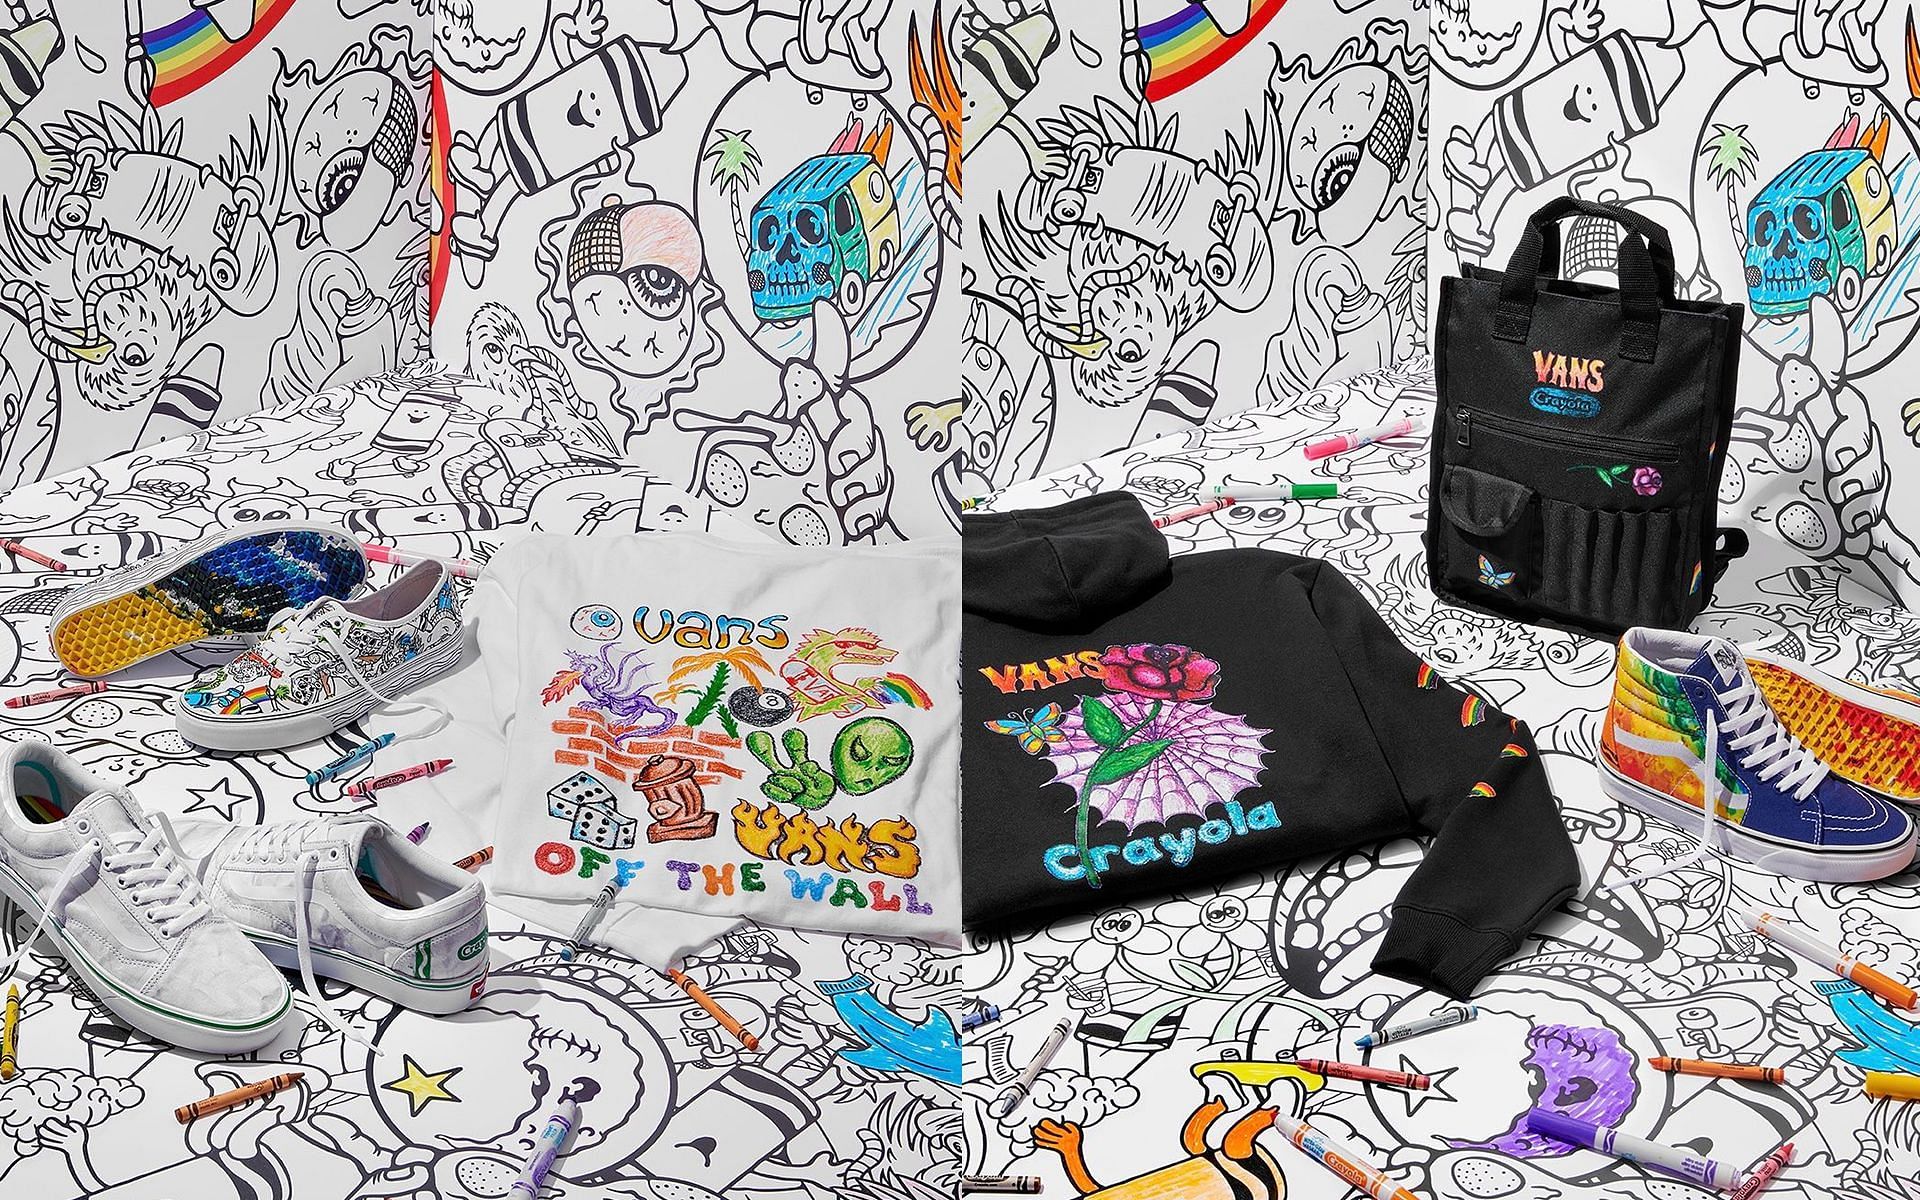 Crayola collaborated with the skateboarding label for colorful collection (Image via Crayola)